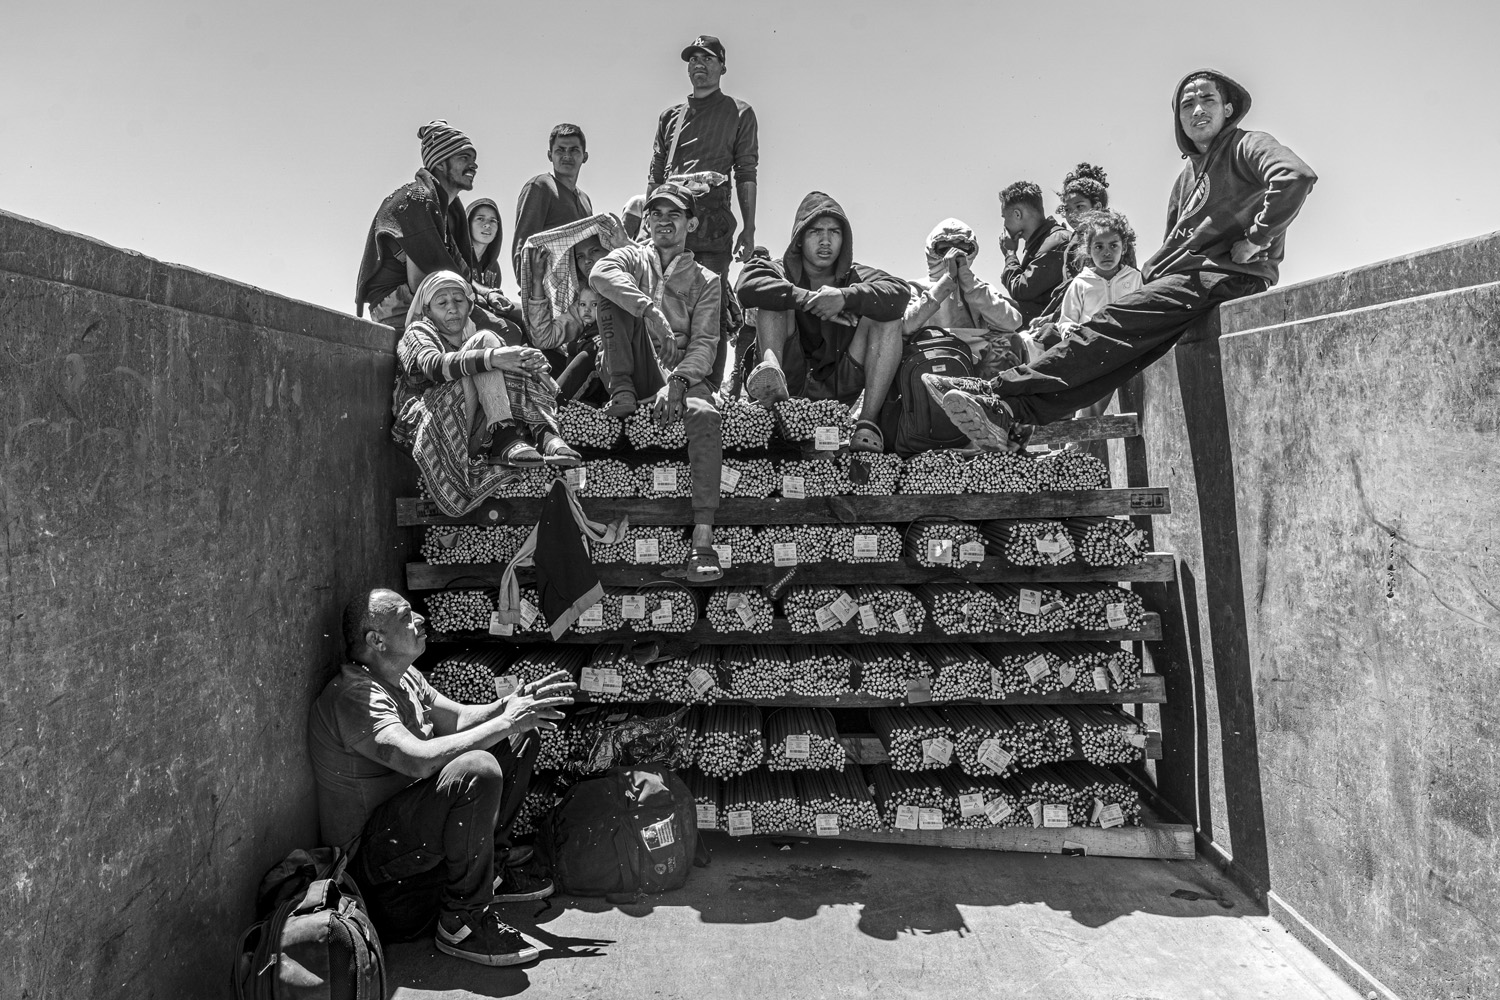 A black and white photo of migrants seated in a tiered fashion on a truck full of goods. Various expressions of fatigue and concern are visible among the group